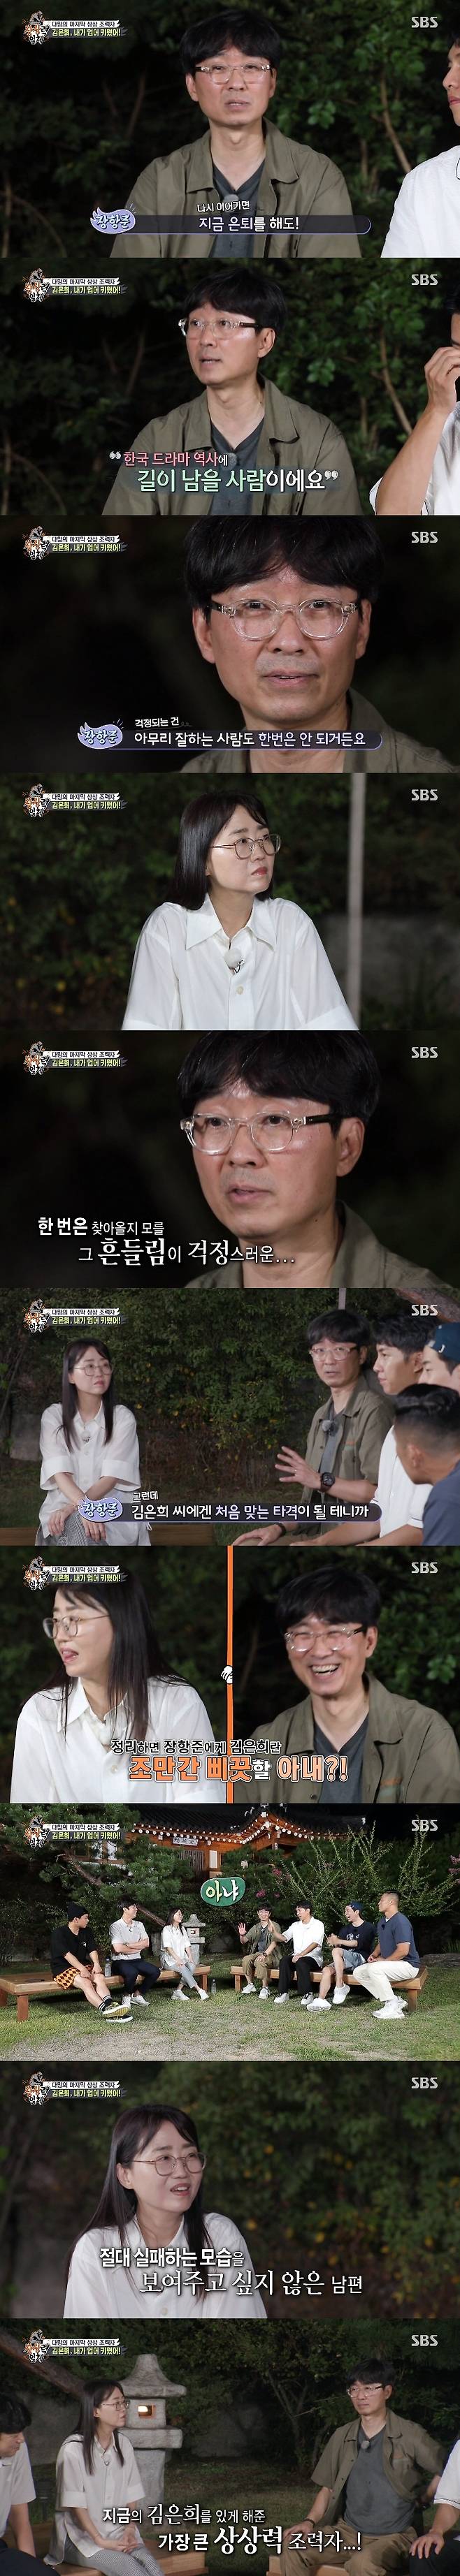 Director Jang Hang-jun, the synonym for South Koreas best honey seller, expressed pride for Kim Eun-hee and her daughter.In SBS entertainment All The Butlers broadcasted on the afternoon of the 12th, All The Butlers members who became Kim Eun-hees Daily Writers Team were portrayed as genre adaptations of traditional fairy tales.The members met with the assistants of Kim Eun-hee and showed their sincerity in adapting the genre.Above all, Kim Eun-hees Husband and film director Jang Hang-jun made a surprise visit to All The Butlers.Lee Seung-gi said, The three most married men in South Korea are mentioned by Do Kyung-wan, Lee Sang-soon, and Jang Hang-jun. So, director Jang Hang-jun said, I would like to see many people who are looking for a fortune as an actor.Each of them is professionally good. Each is excellent, but the weight is tilted and thats the story. Kim Eun-hee writer also welcomed the surprise appearance of director Jang Hang-jun; writer Kim Eun-hee said, It was the first shooter and direct senior in my life.He is the one who taught scenarios and society, he introduced Husband Jang Hang-jun.Director Jang Hang-jun said, I think I contributed to the work of Kim Eun-hee writer to some extent; I was very cute for Kim Eun-hee.The wit and dedication of the distinctive was constant.Regarding his stake in the Kingdom series, director Jang Hang-jun claimed the stake, but rather, writer Kim Eun-hee said, I have never helped the play.I did not even do a monitor, he said.I have never asked you to read a book and I have never written it, but I have written a novel since the second grade of elementary school.Quality is rising. If you do well, your old age will be okay. Concerns about Kim Eun-hee writer also continued: Kim Eun-hee is a person who will remain in the history of Korean dramas even if he retires now.But no one is good at it. I worry about the shaking that might come once.I am worried that it will be the first blow for Kim Eun-hee writer. Kim Eun-hees heart toward this director Jang Hang-jun was also different.Kim Eun-hee writes, It is Husband who does not want to show a failure.It is the biggest imagination helper who has made Kim Eun-hee now. 